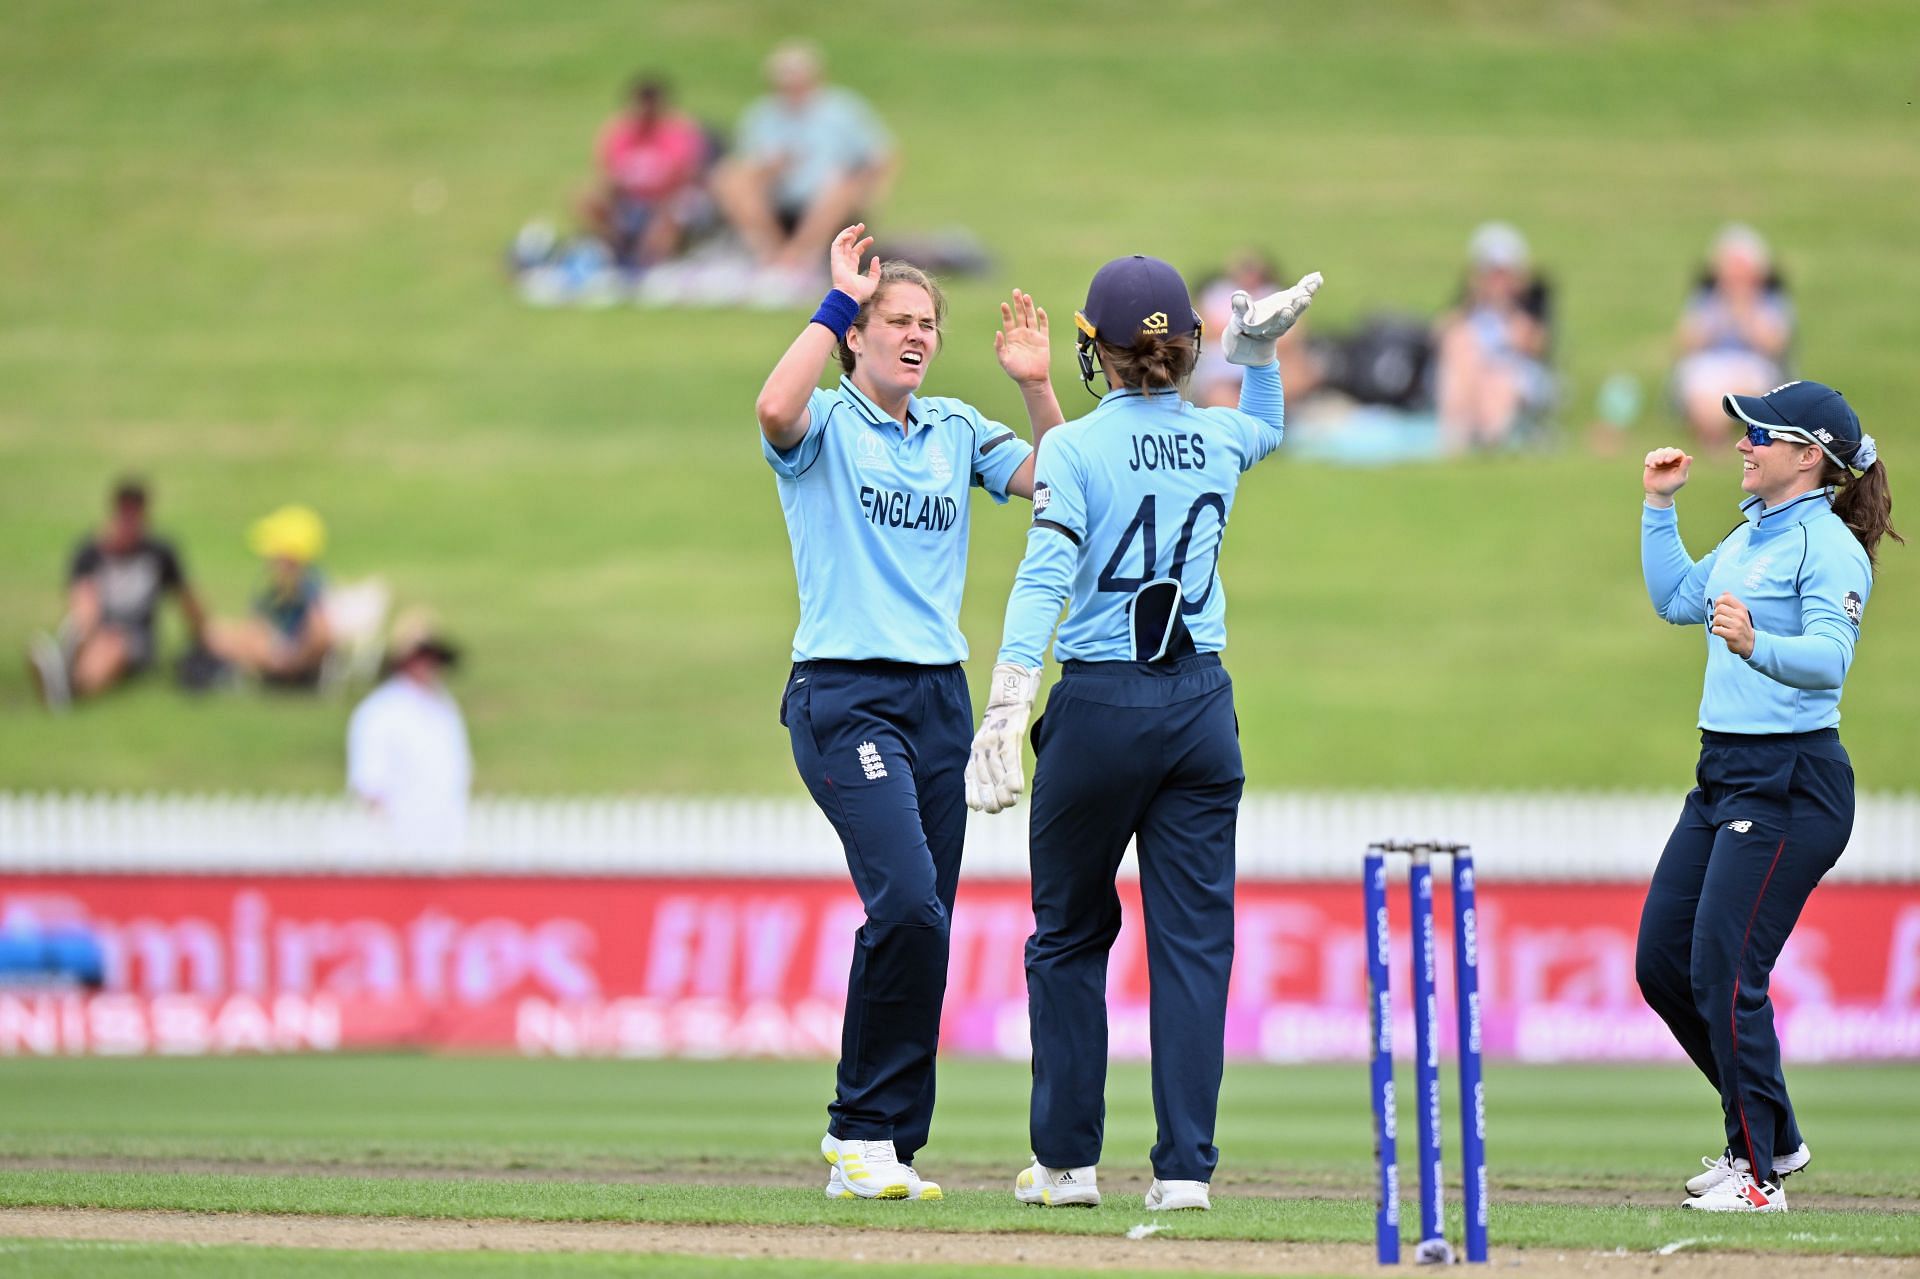 ICC Women’s World Cup 2022, Match 15: England Women vs India Women Full Preview, Match Details, Probable XIs, Pitch Report, and Dream11 Team Prediction | SportzPoint.com